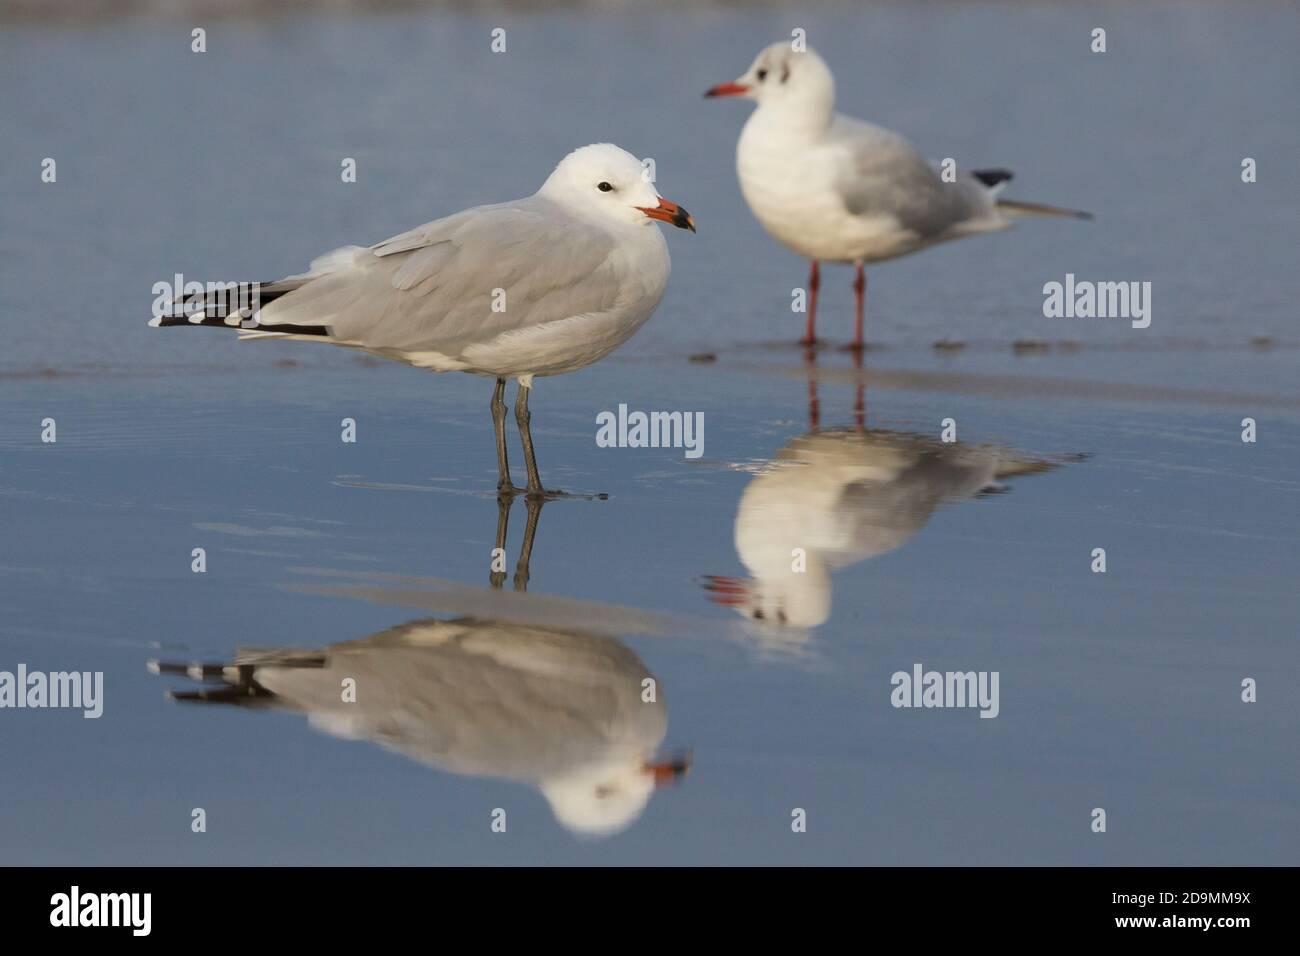 Audouin's Gull (Ichthyaetus audouinii), side view of an adult standing on the shore together with a Black-headed Gull, Campania, Italy Stock Photo